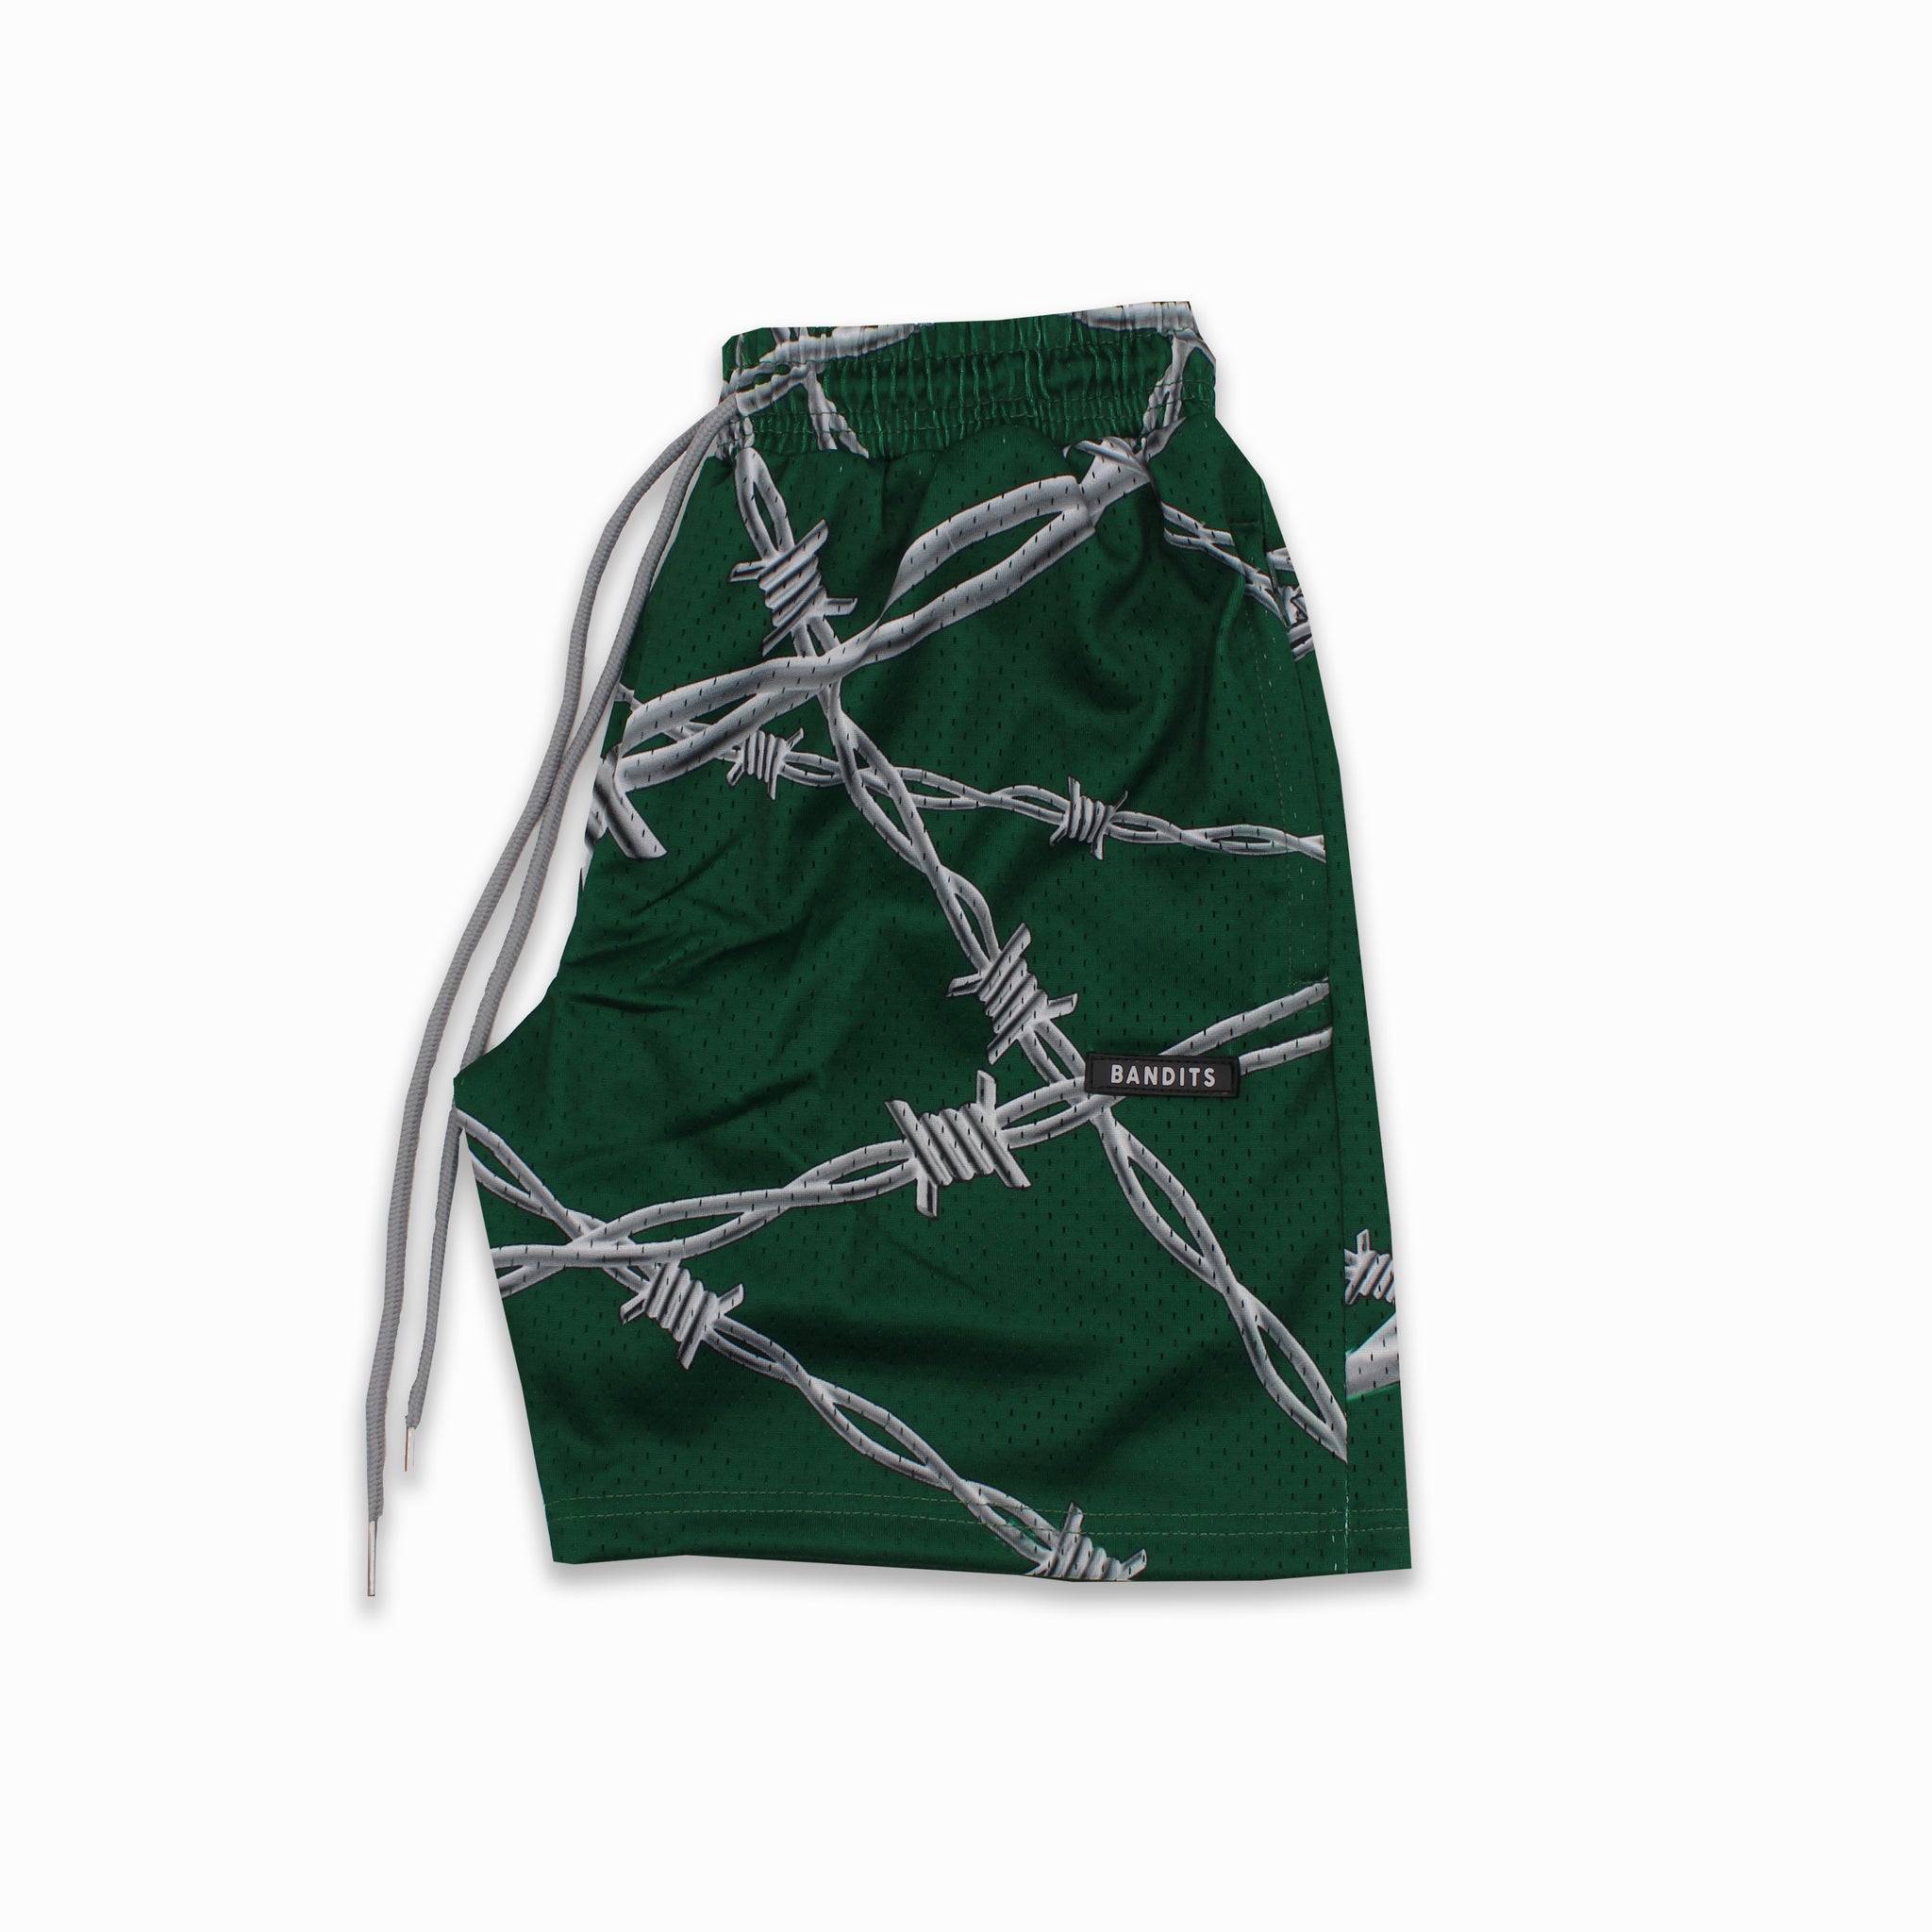 BARBED WIRE MESH SHORT GREEN